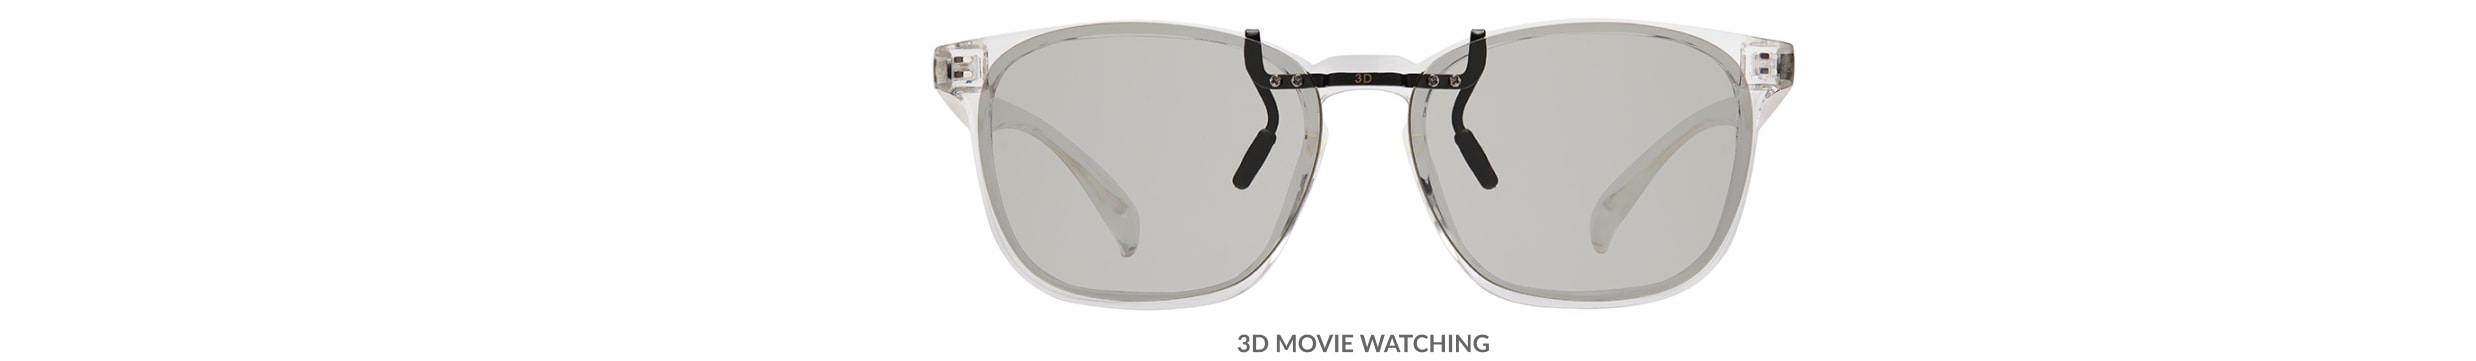 Custom clip-ons. Our polarized custom clip-ons reduce glare and are available for almost any frame. Each clip-on is specially cut to fit the frame with prices starting at just $6.95  (Compare to $50). Zenni square glasses #2020123 in clear, shown with 3D movie watching custom clip-on.